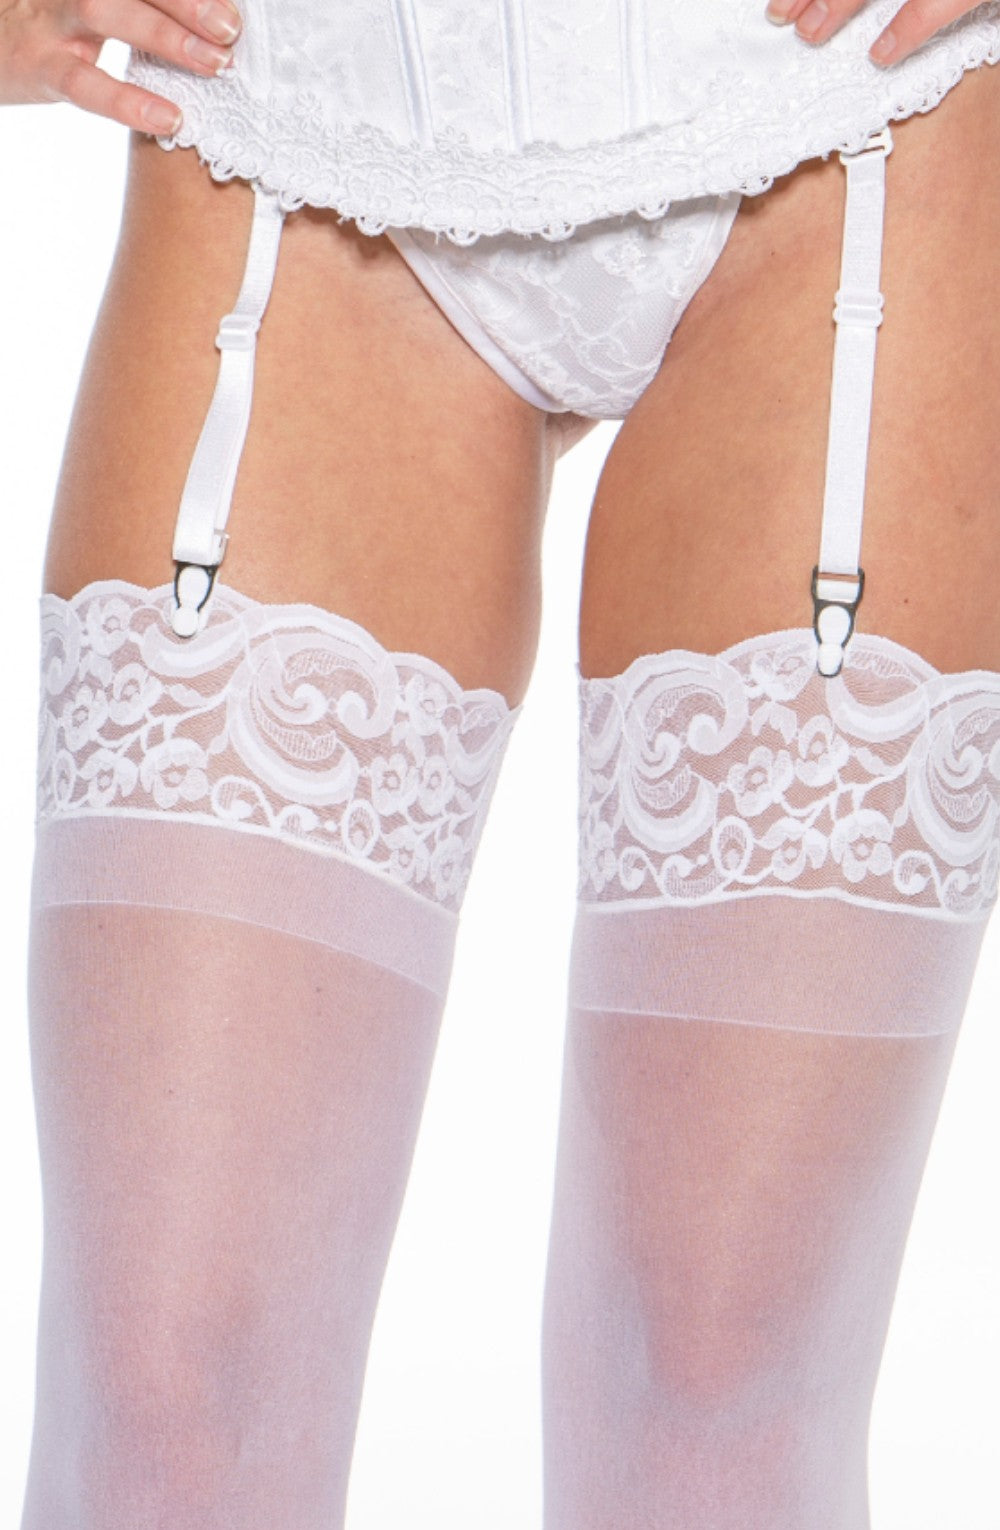 Shirley of Hollywood 90026 Lace Top Stockings White - PureDiva